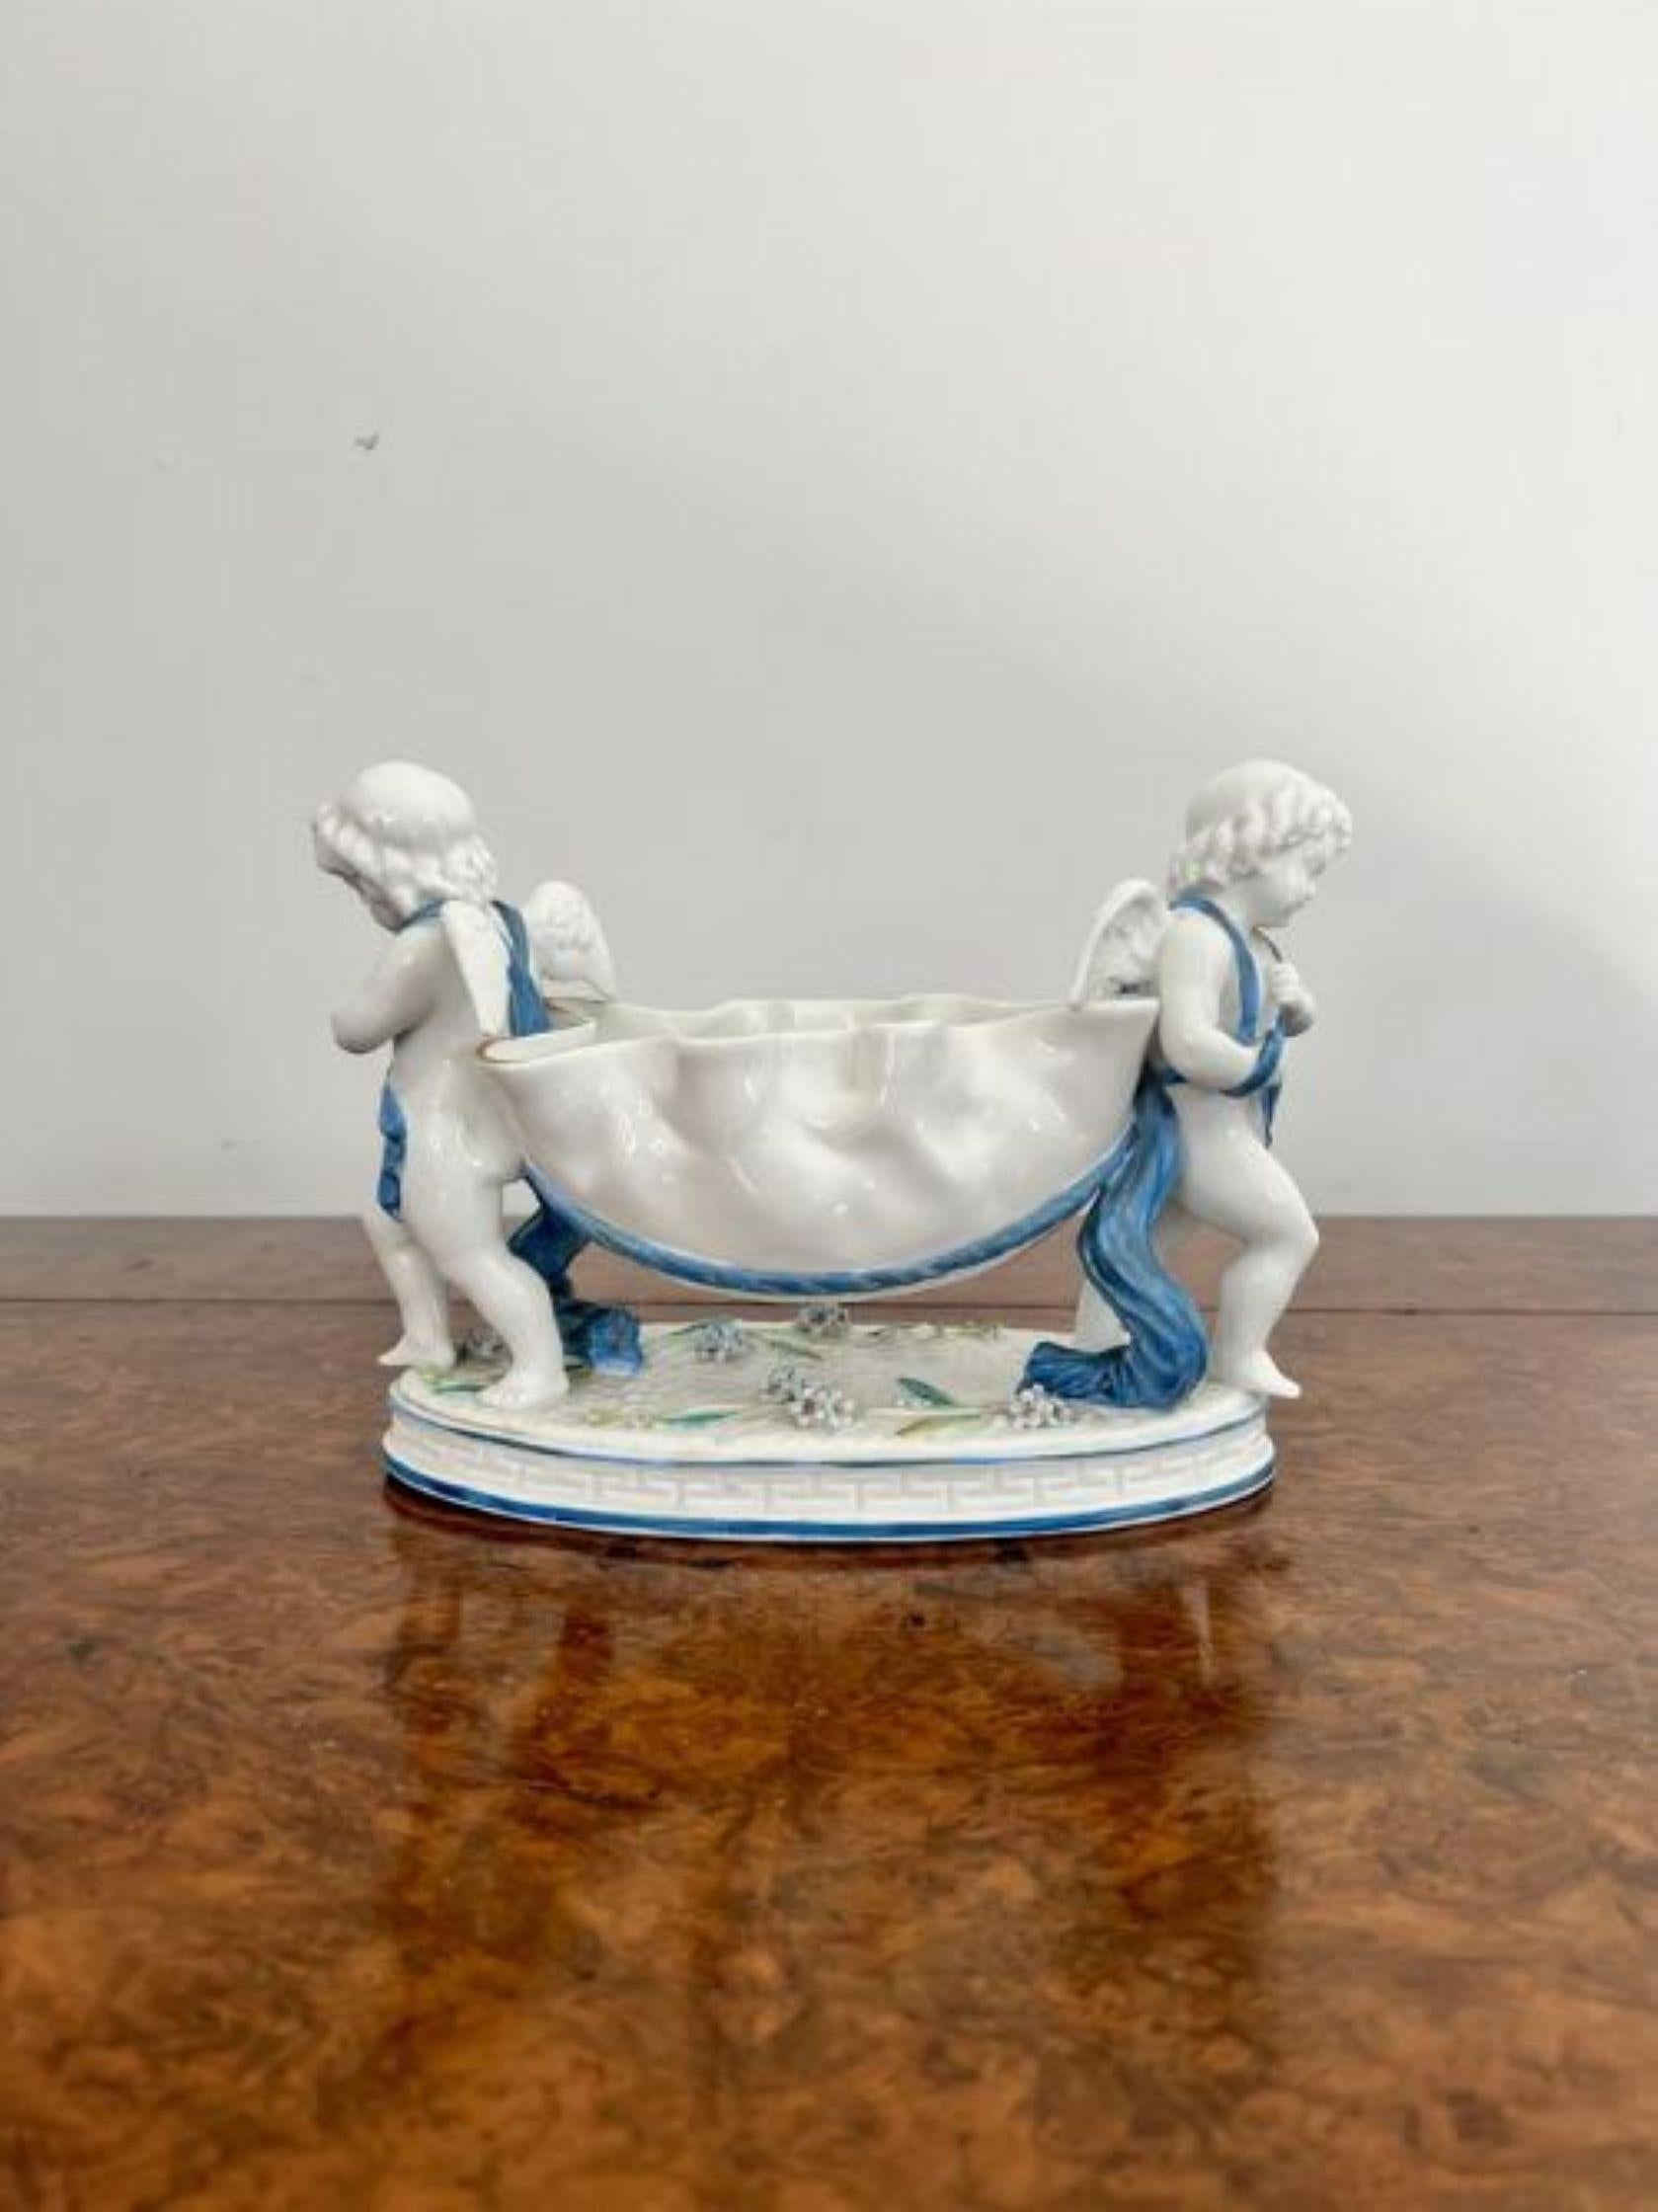 Antique Victorian quality continental porcelain group having two cherubs carrying a shaped dish standing on an oval shaped base in wonderful blue and white colours.